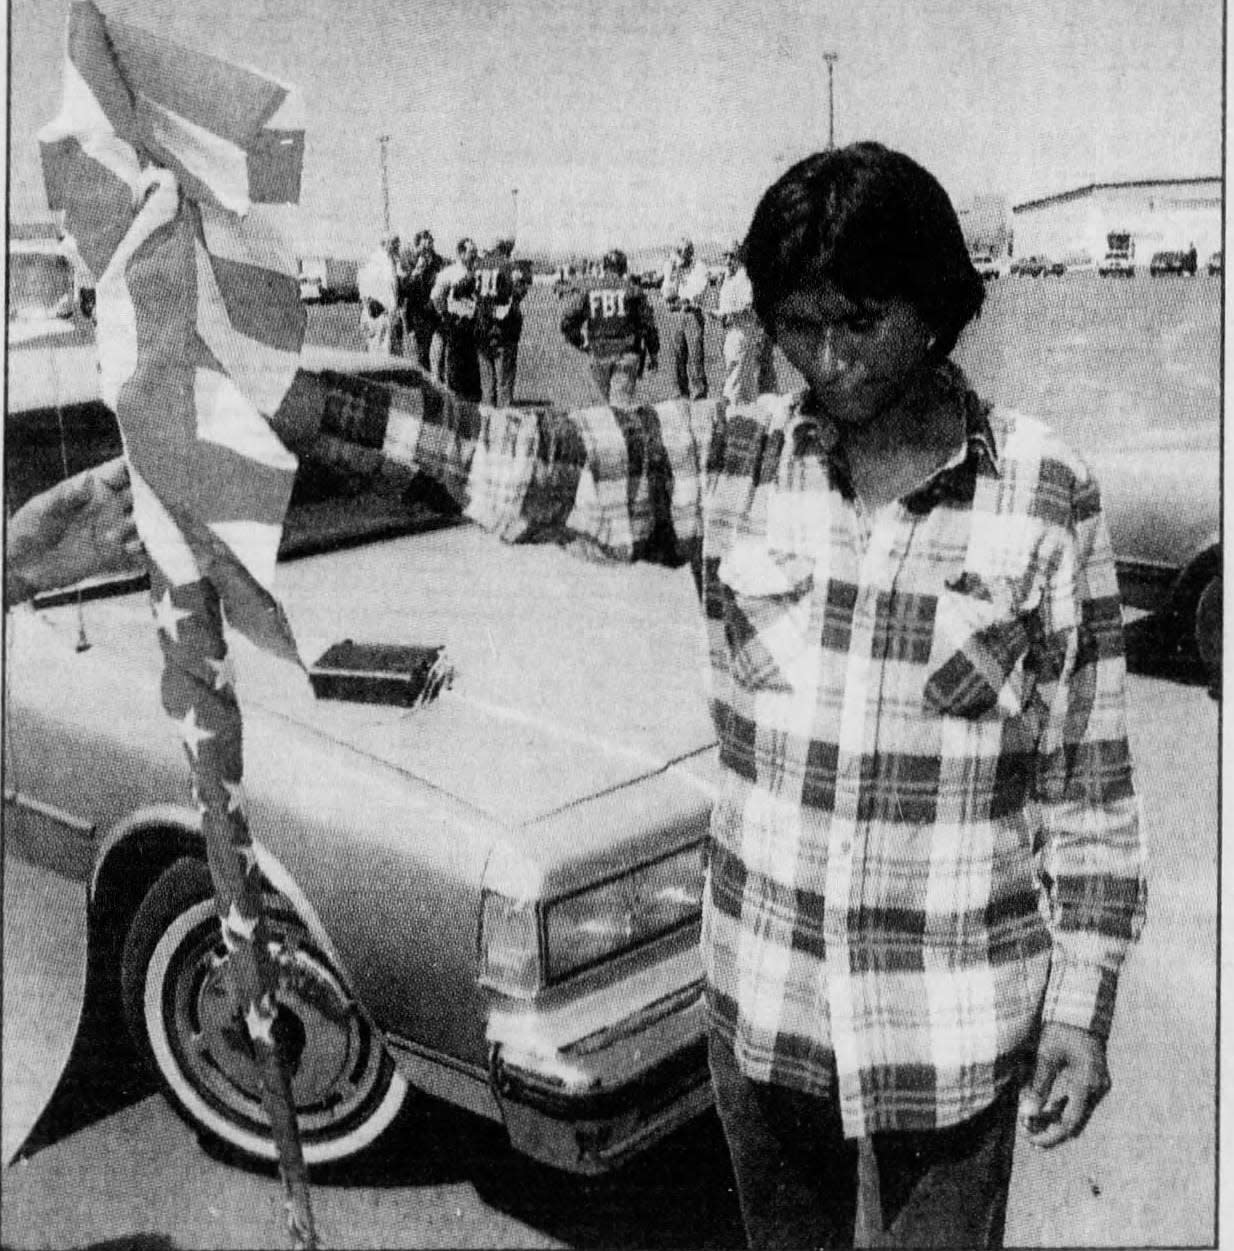 Nolan Thomas, creates a distress signal by holding an American flag upside down. Thursday's raids were the latest development in a running controversy over the casino-style gambling on the state's reservations. (Published May 13, 1992)